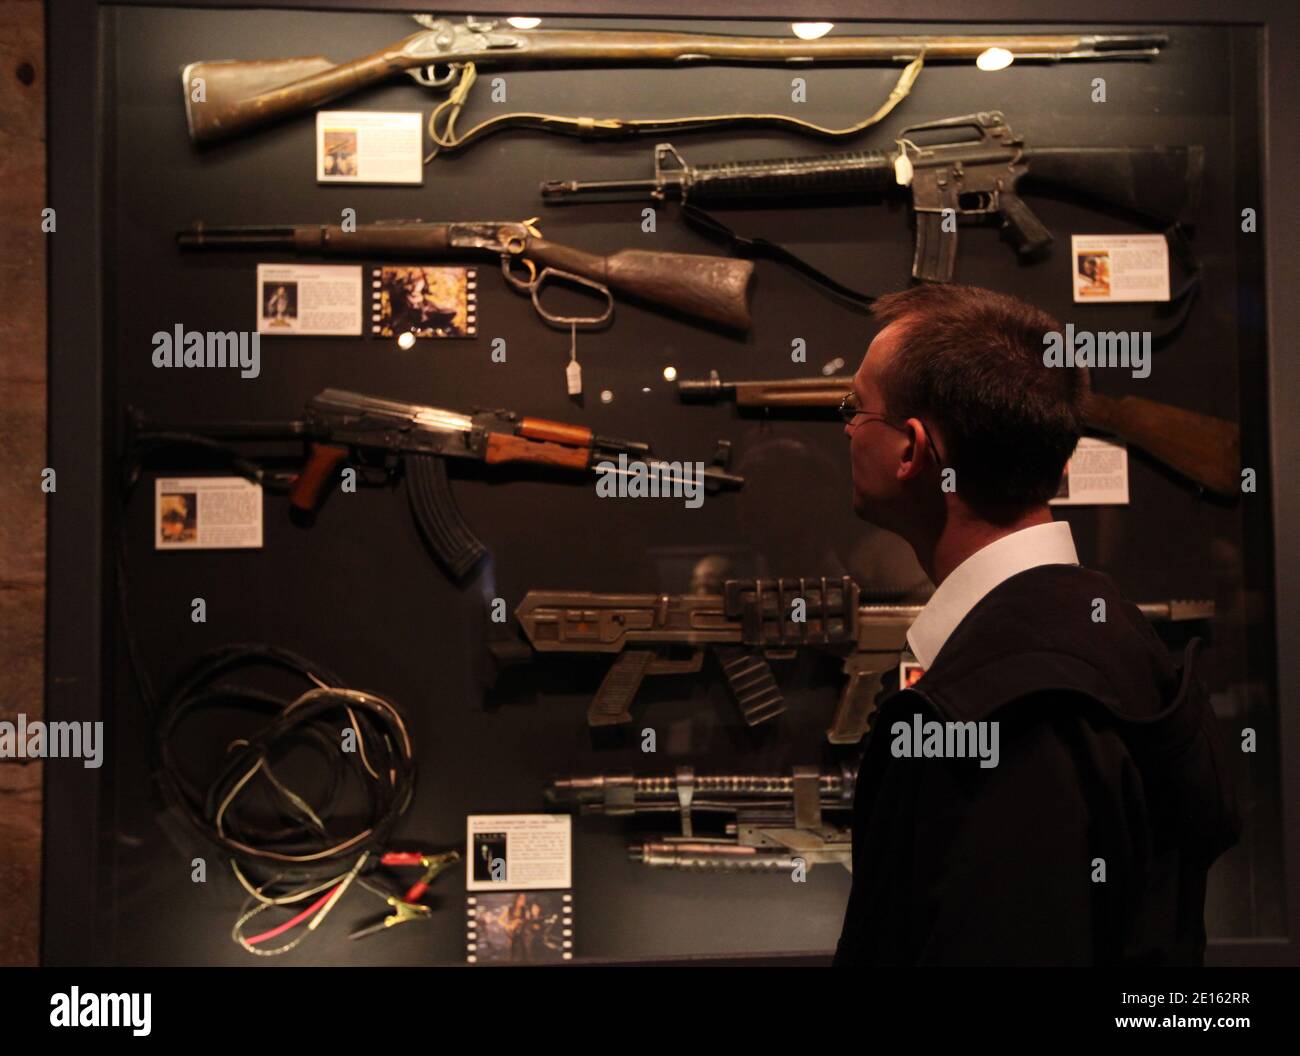 Various fake weapons are on display in the International Museum of the Miniature and Cinema Set, at the Maison des Avocats in Lyon, France on April 20, 2011. The museum displays the secrets and techniques of special effects' creators, movie sets, models, robots, imaginary creatures, fancies, costumes prosthesis and genuine devices from film sets. Photos by Vincent Dargent/ABACAPRESS.COM Stock Photo